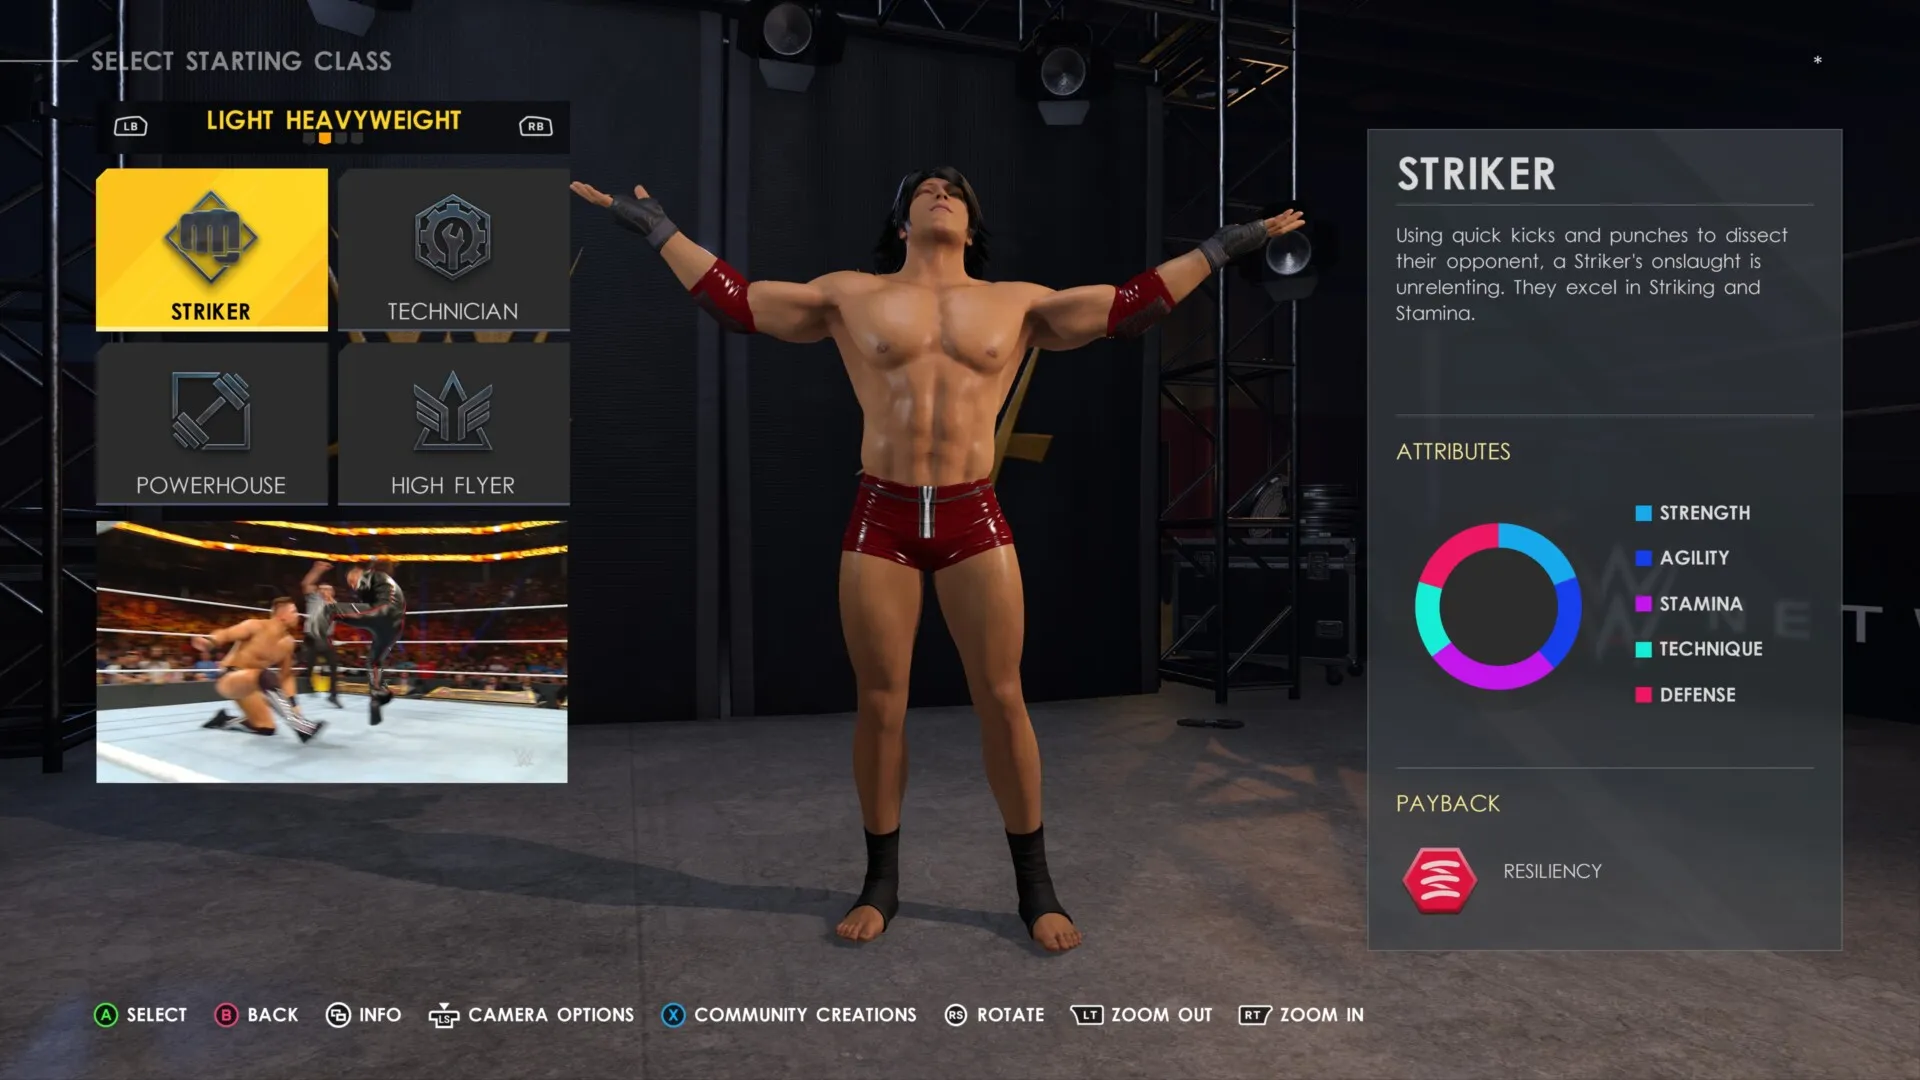 WWE 2K22: Create a Superstar guide — Face photos and CAWs